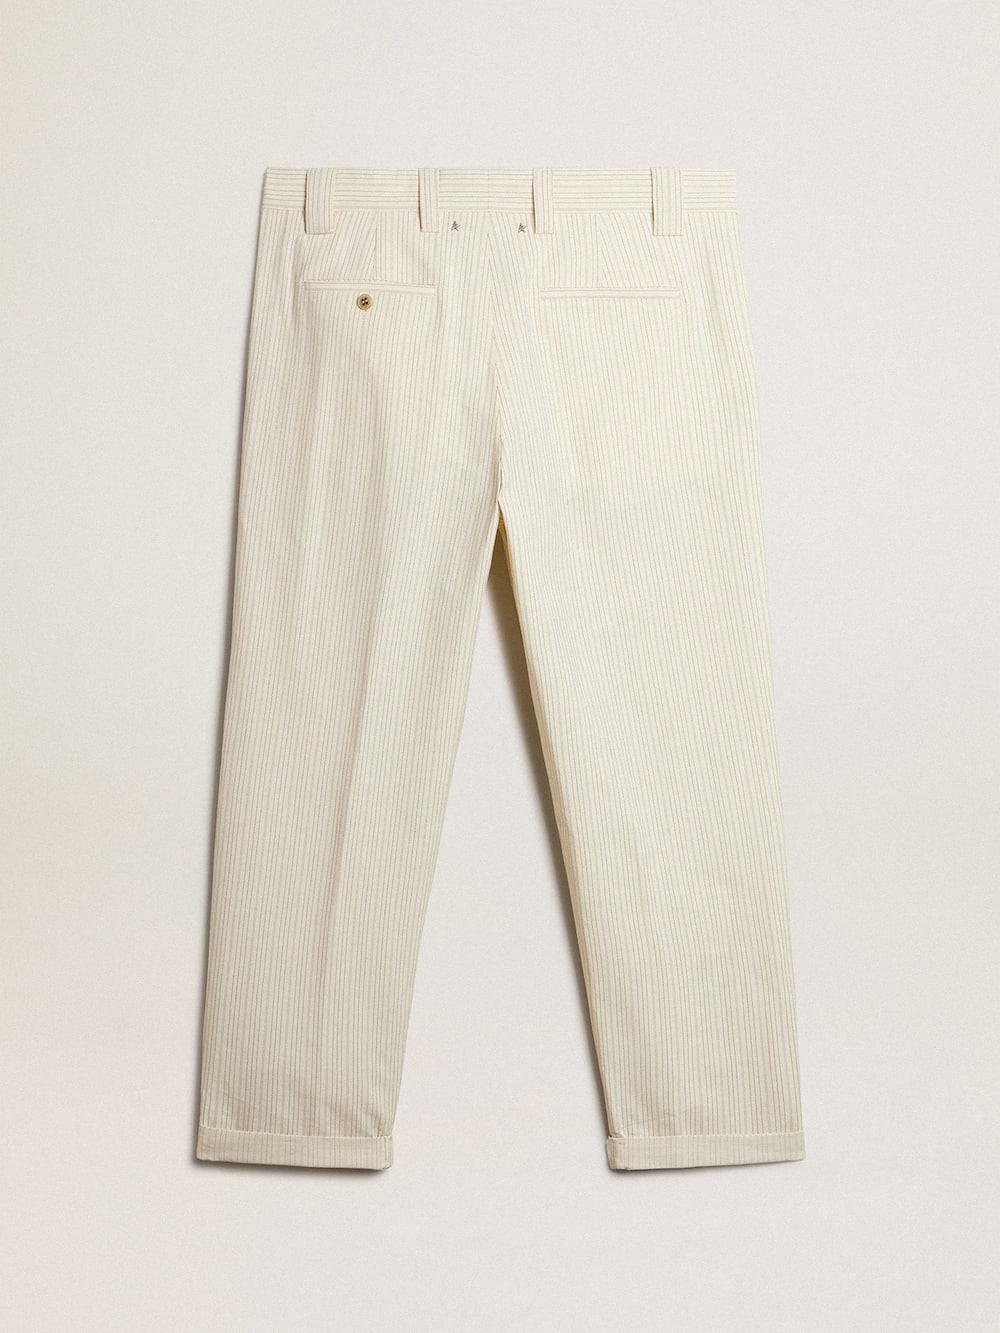 Golden Goose - Men's cream-colored pants in striped cotton in 